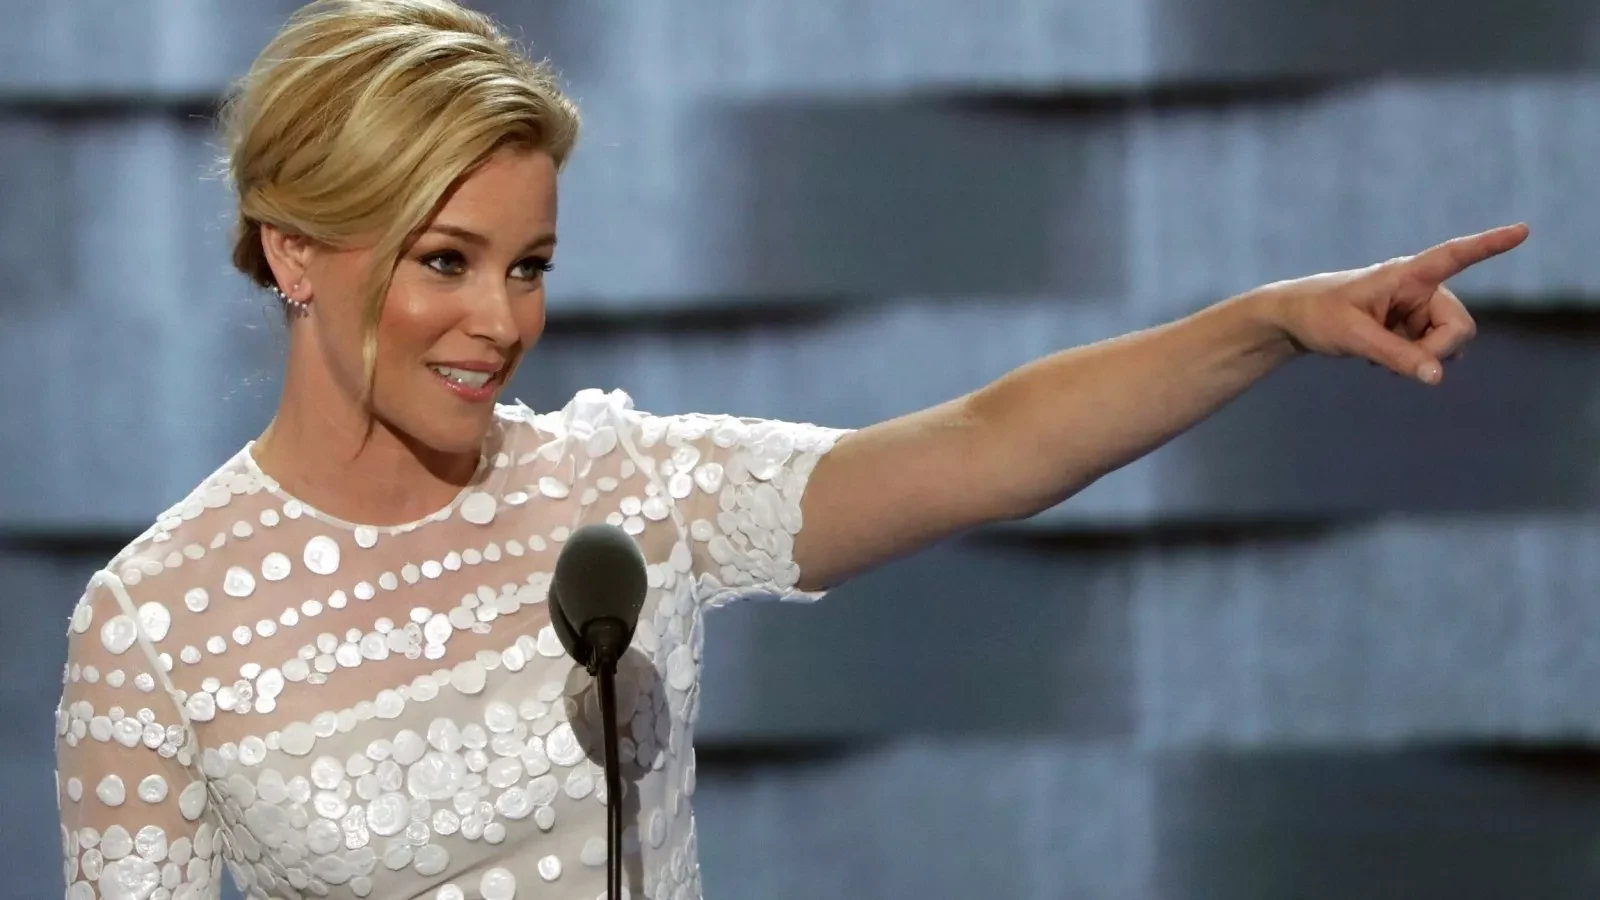 Elizabeth Banks was forced to apologize after fans called her out for her ill-remarks